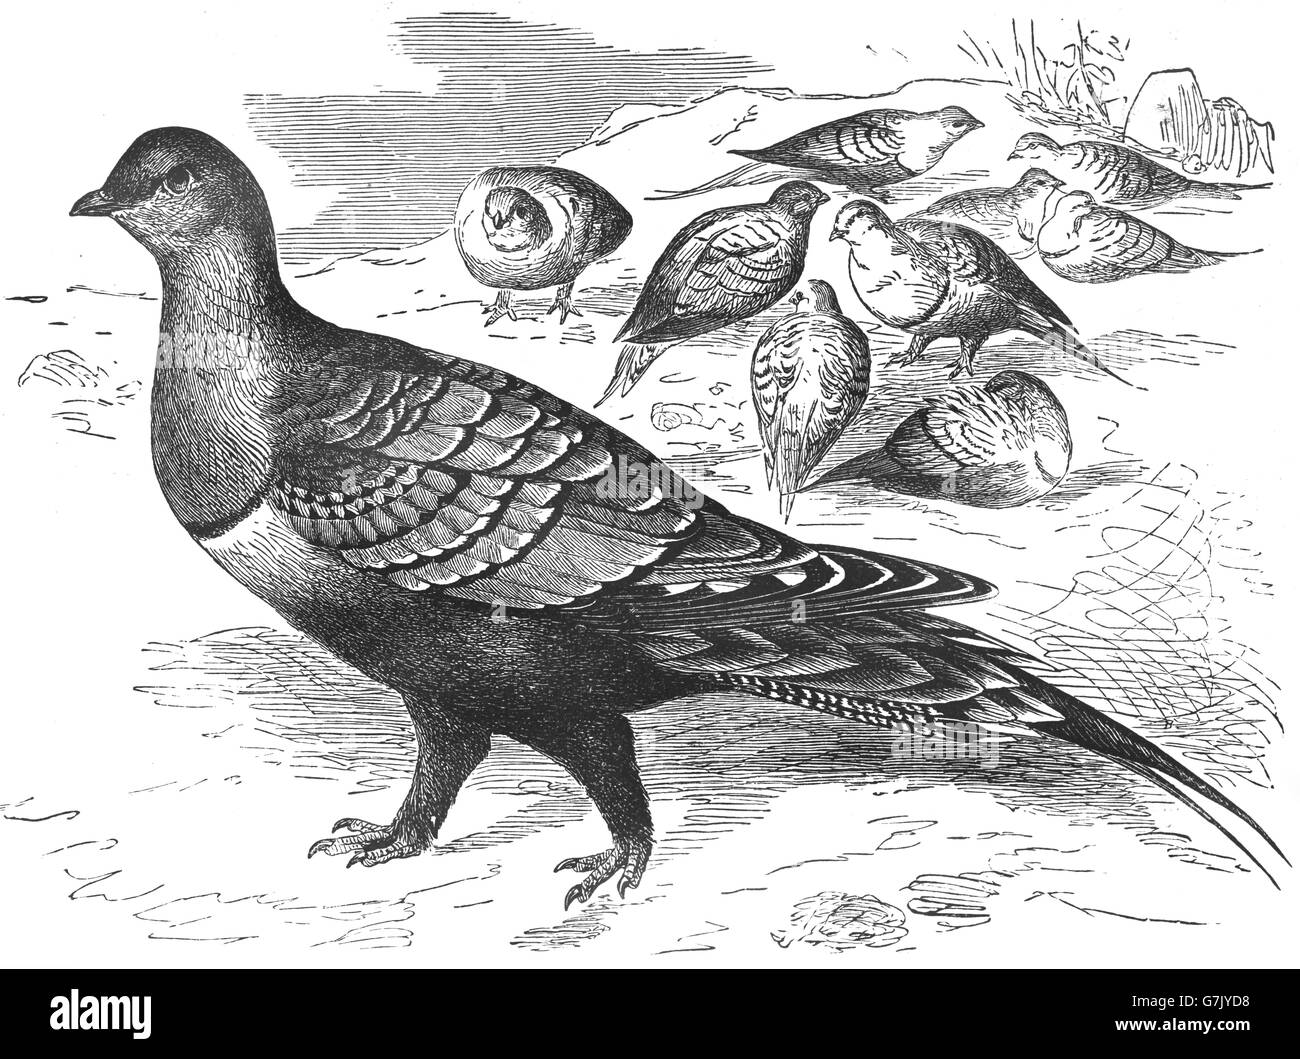 Chestnut-bellied sandgrouse, Pterocles exustus, illustration from book dated 1904 Stock Photo